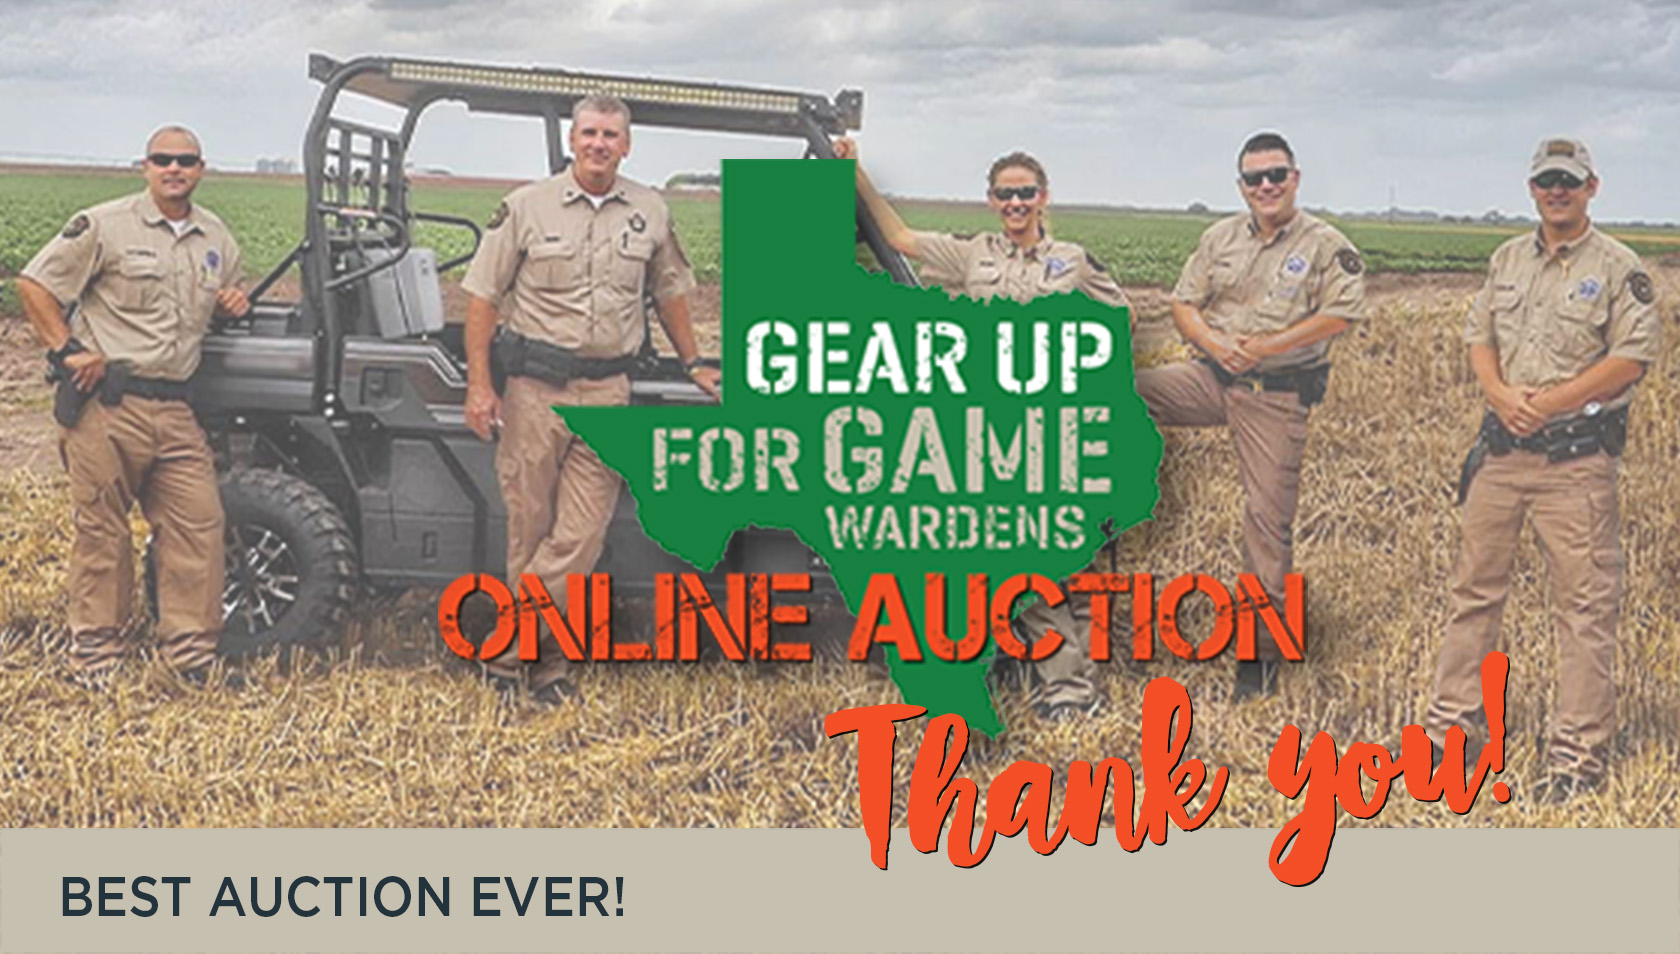 Story #3: Best Auction Ever!